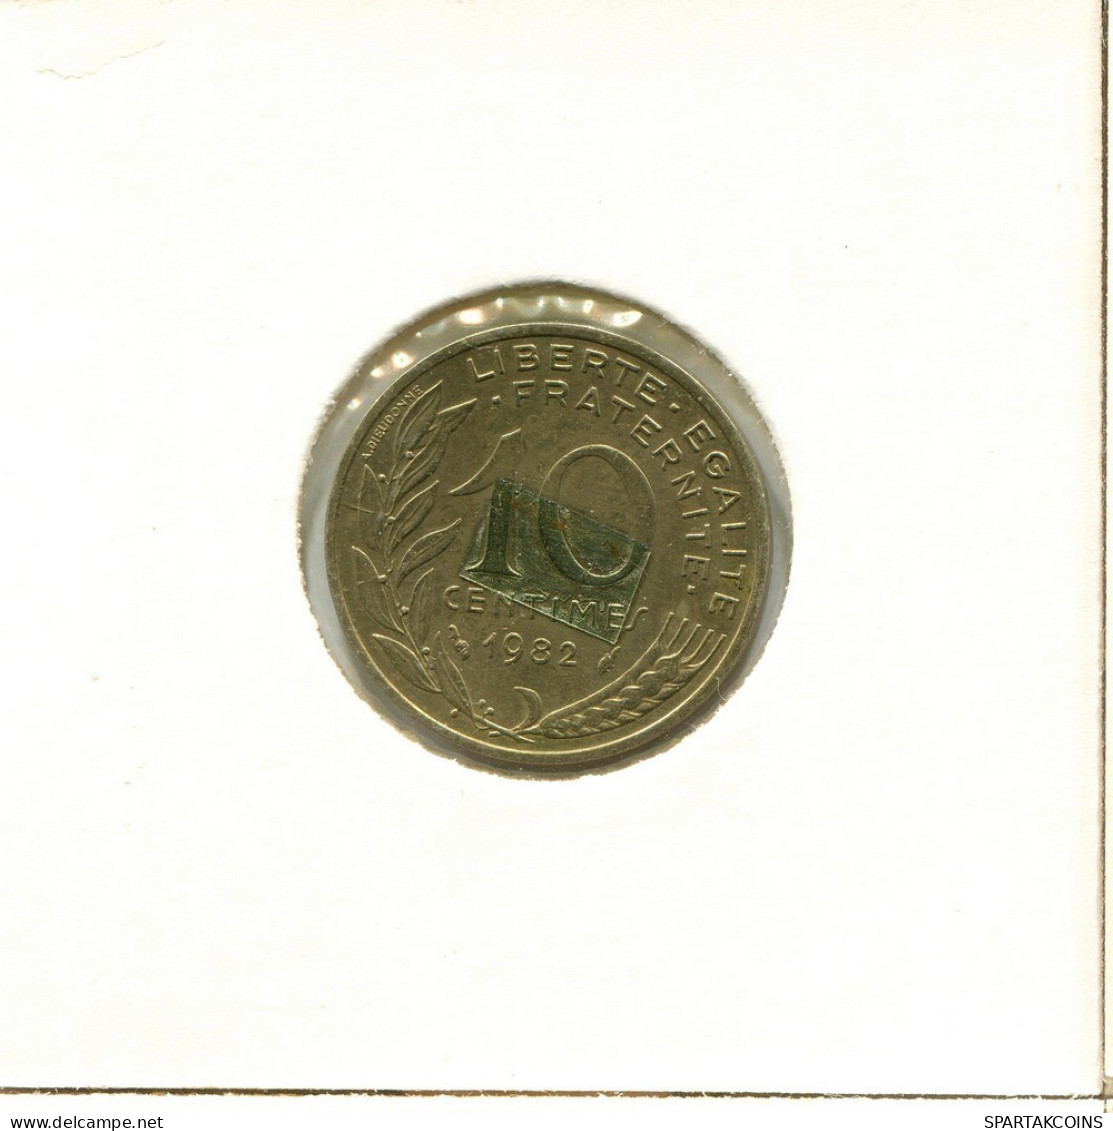 10 CENTIMES 1982 FRANCE Coin #BB460.U.A - 10 Centimes